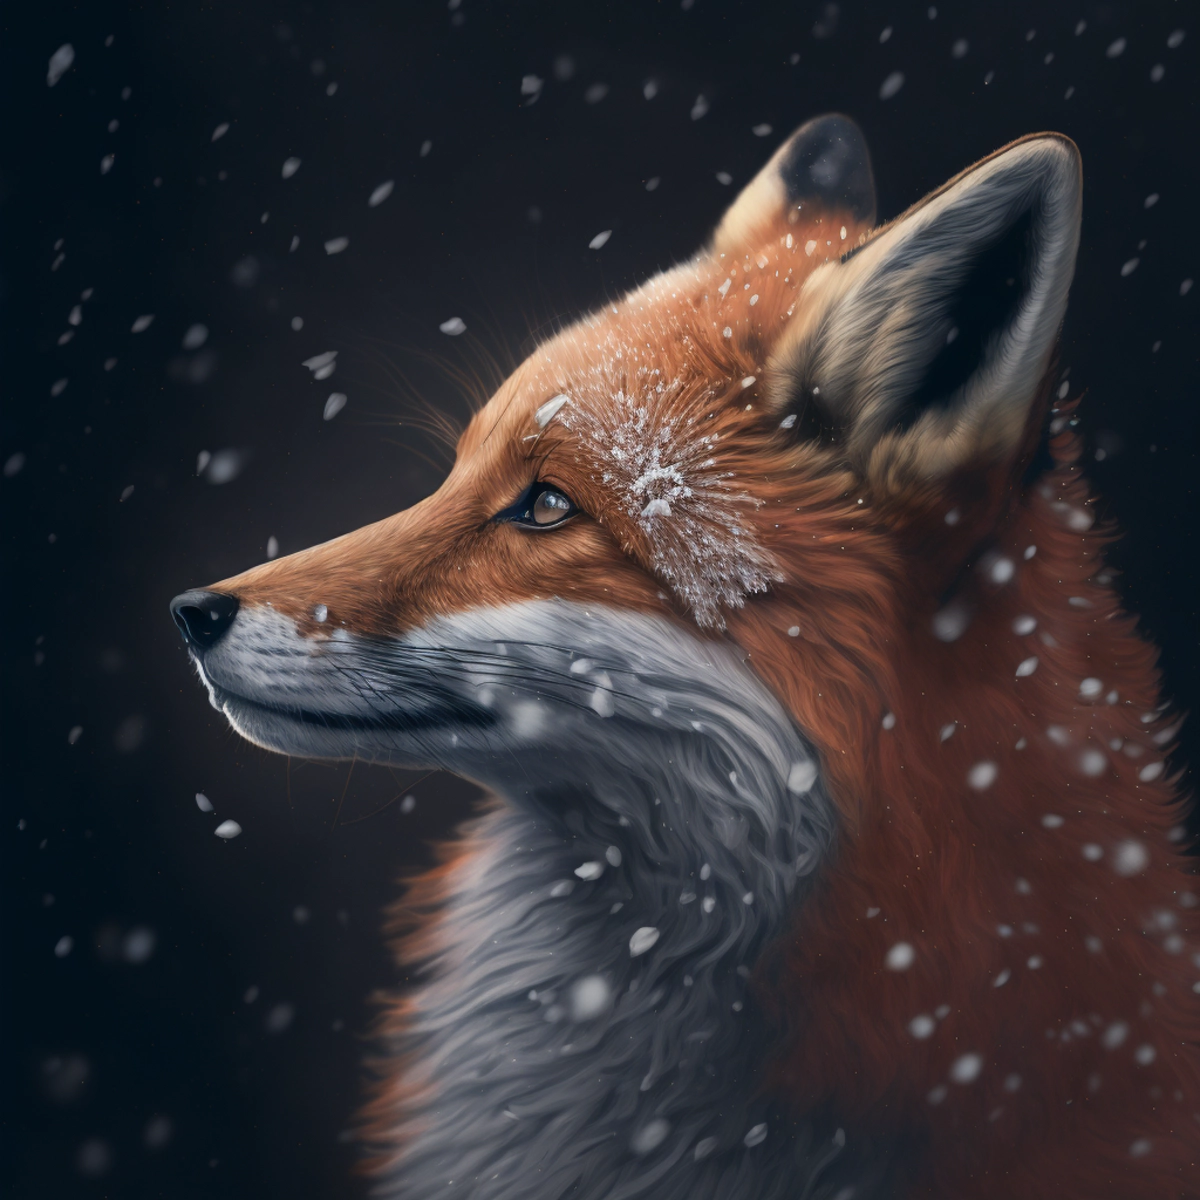 A close-up portrait of a curious fox, with snowflakes resting on its fur